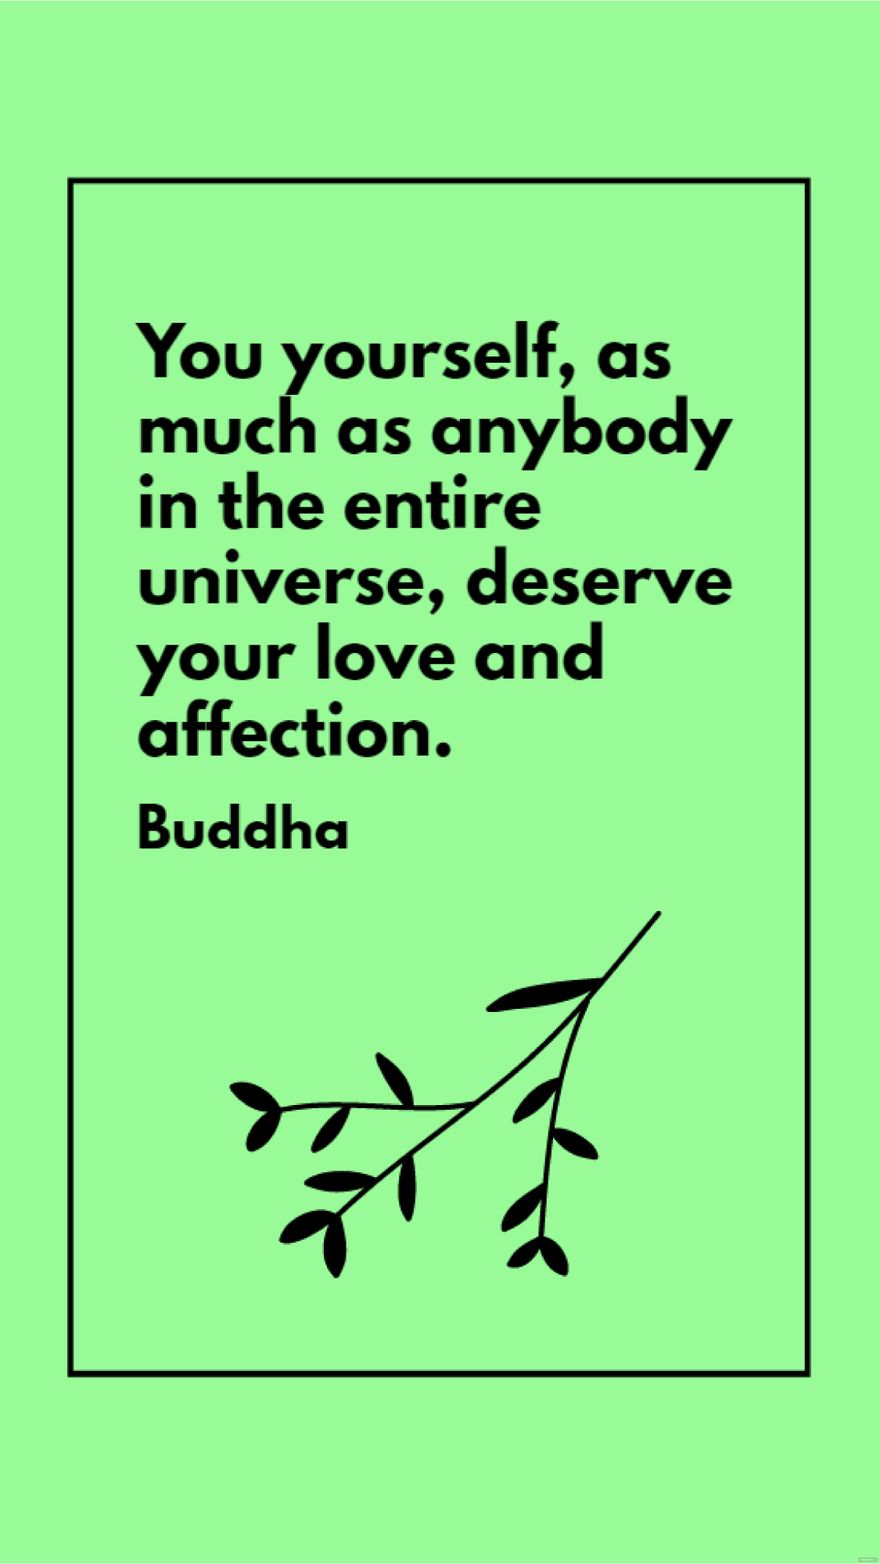 Buddha - You yourself, as much as anybody in the entire universe, deserve your love and affection.